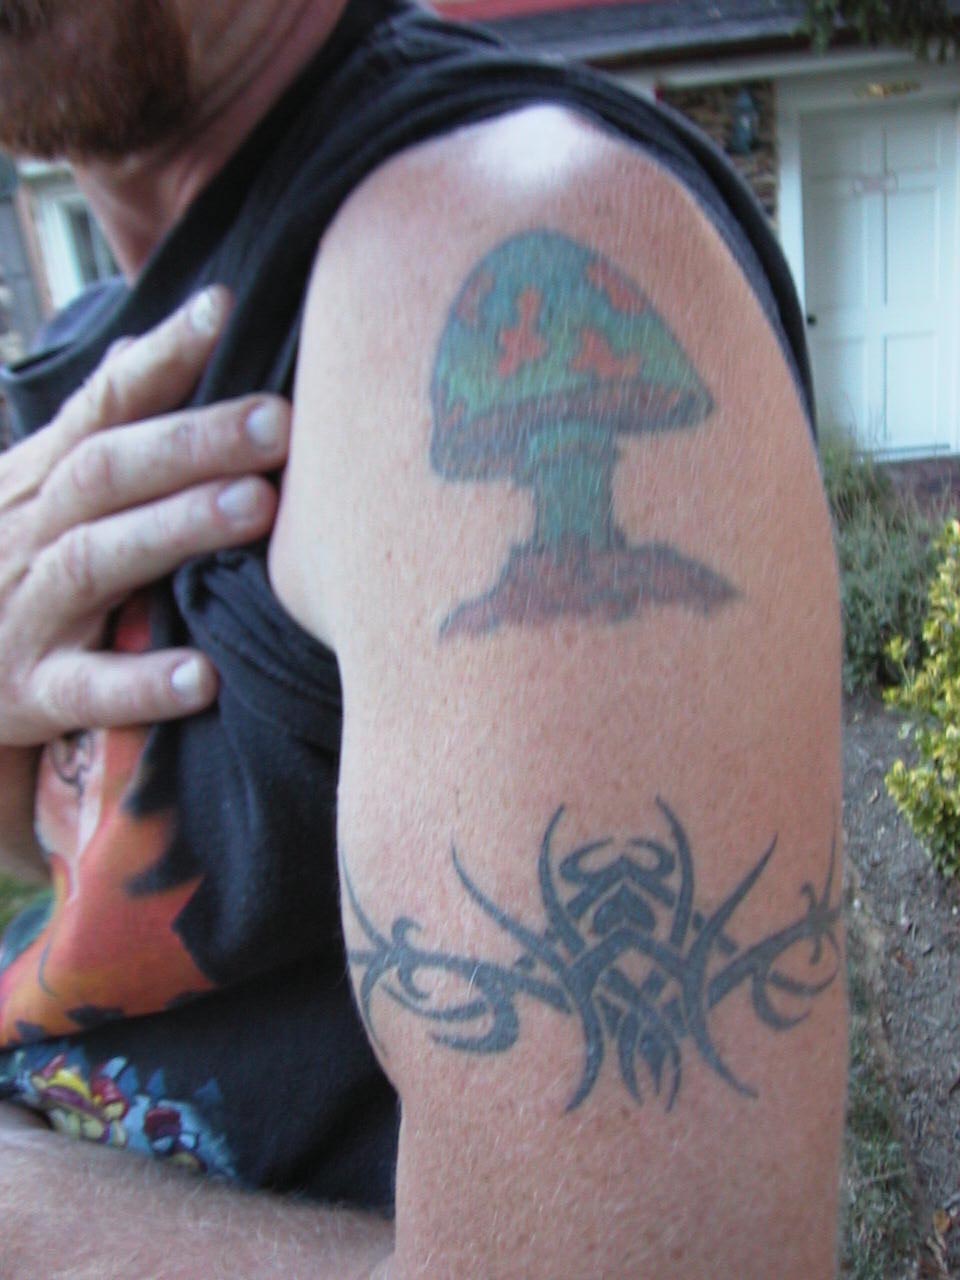 This was my first of many tattoos ,with Allman Brother meaning.Its about 12 years old and was recolored about 4 years ago.As you can see I also am wearing my Allman Brothers shirt proudly.